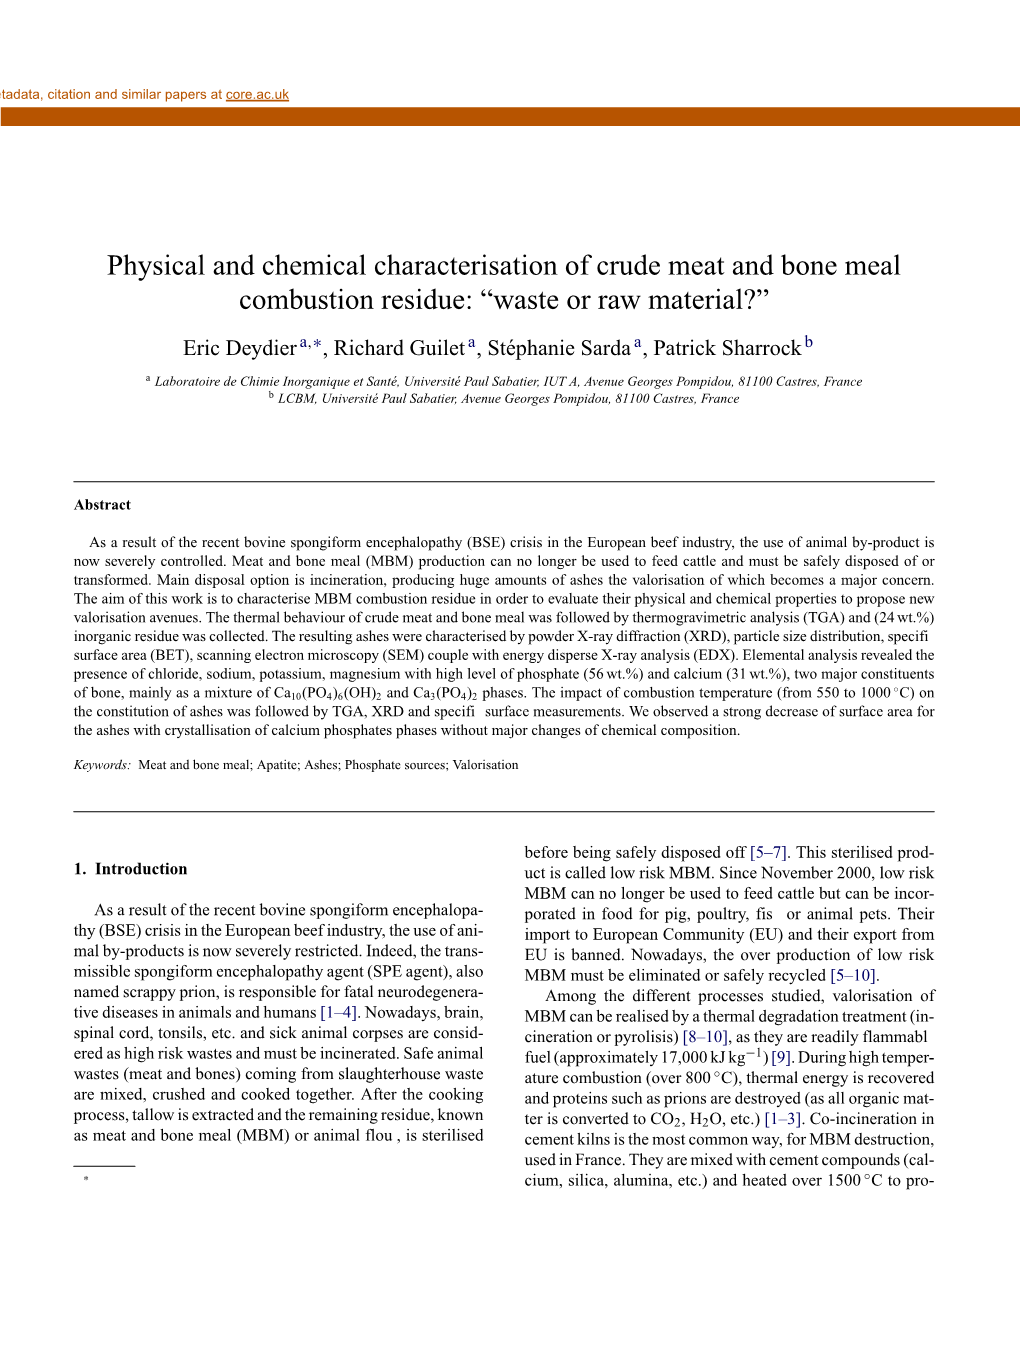 Physical and Chemical Characterisation of Crude